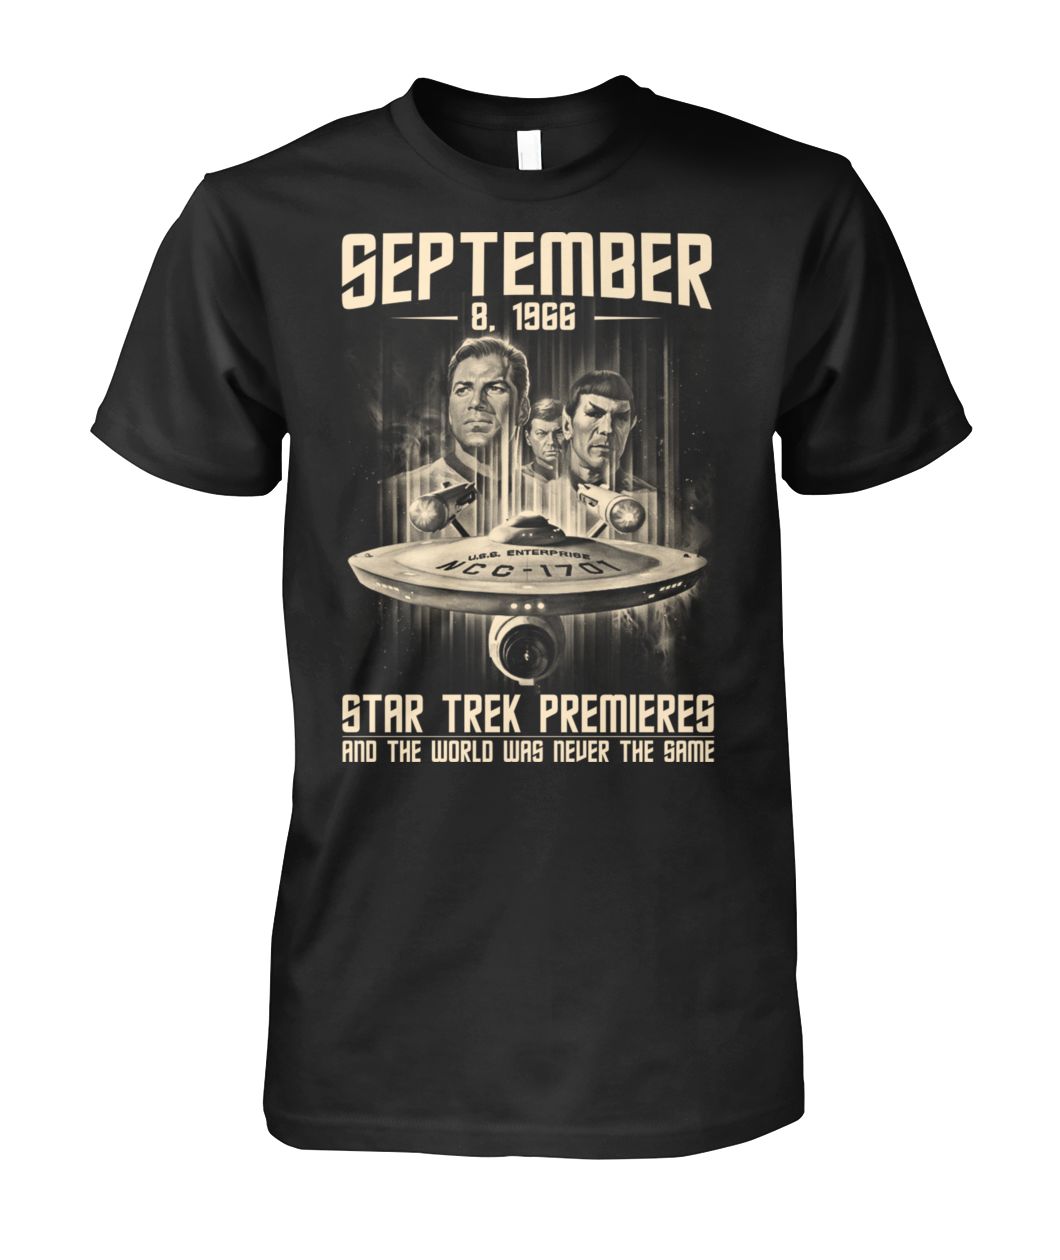 September 8-1966 Star Trek premieres and the world was never the same classic shirt